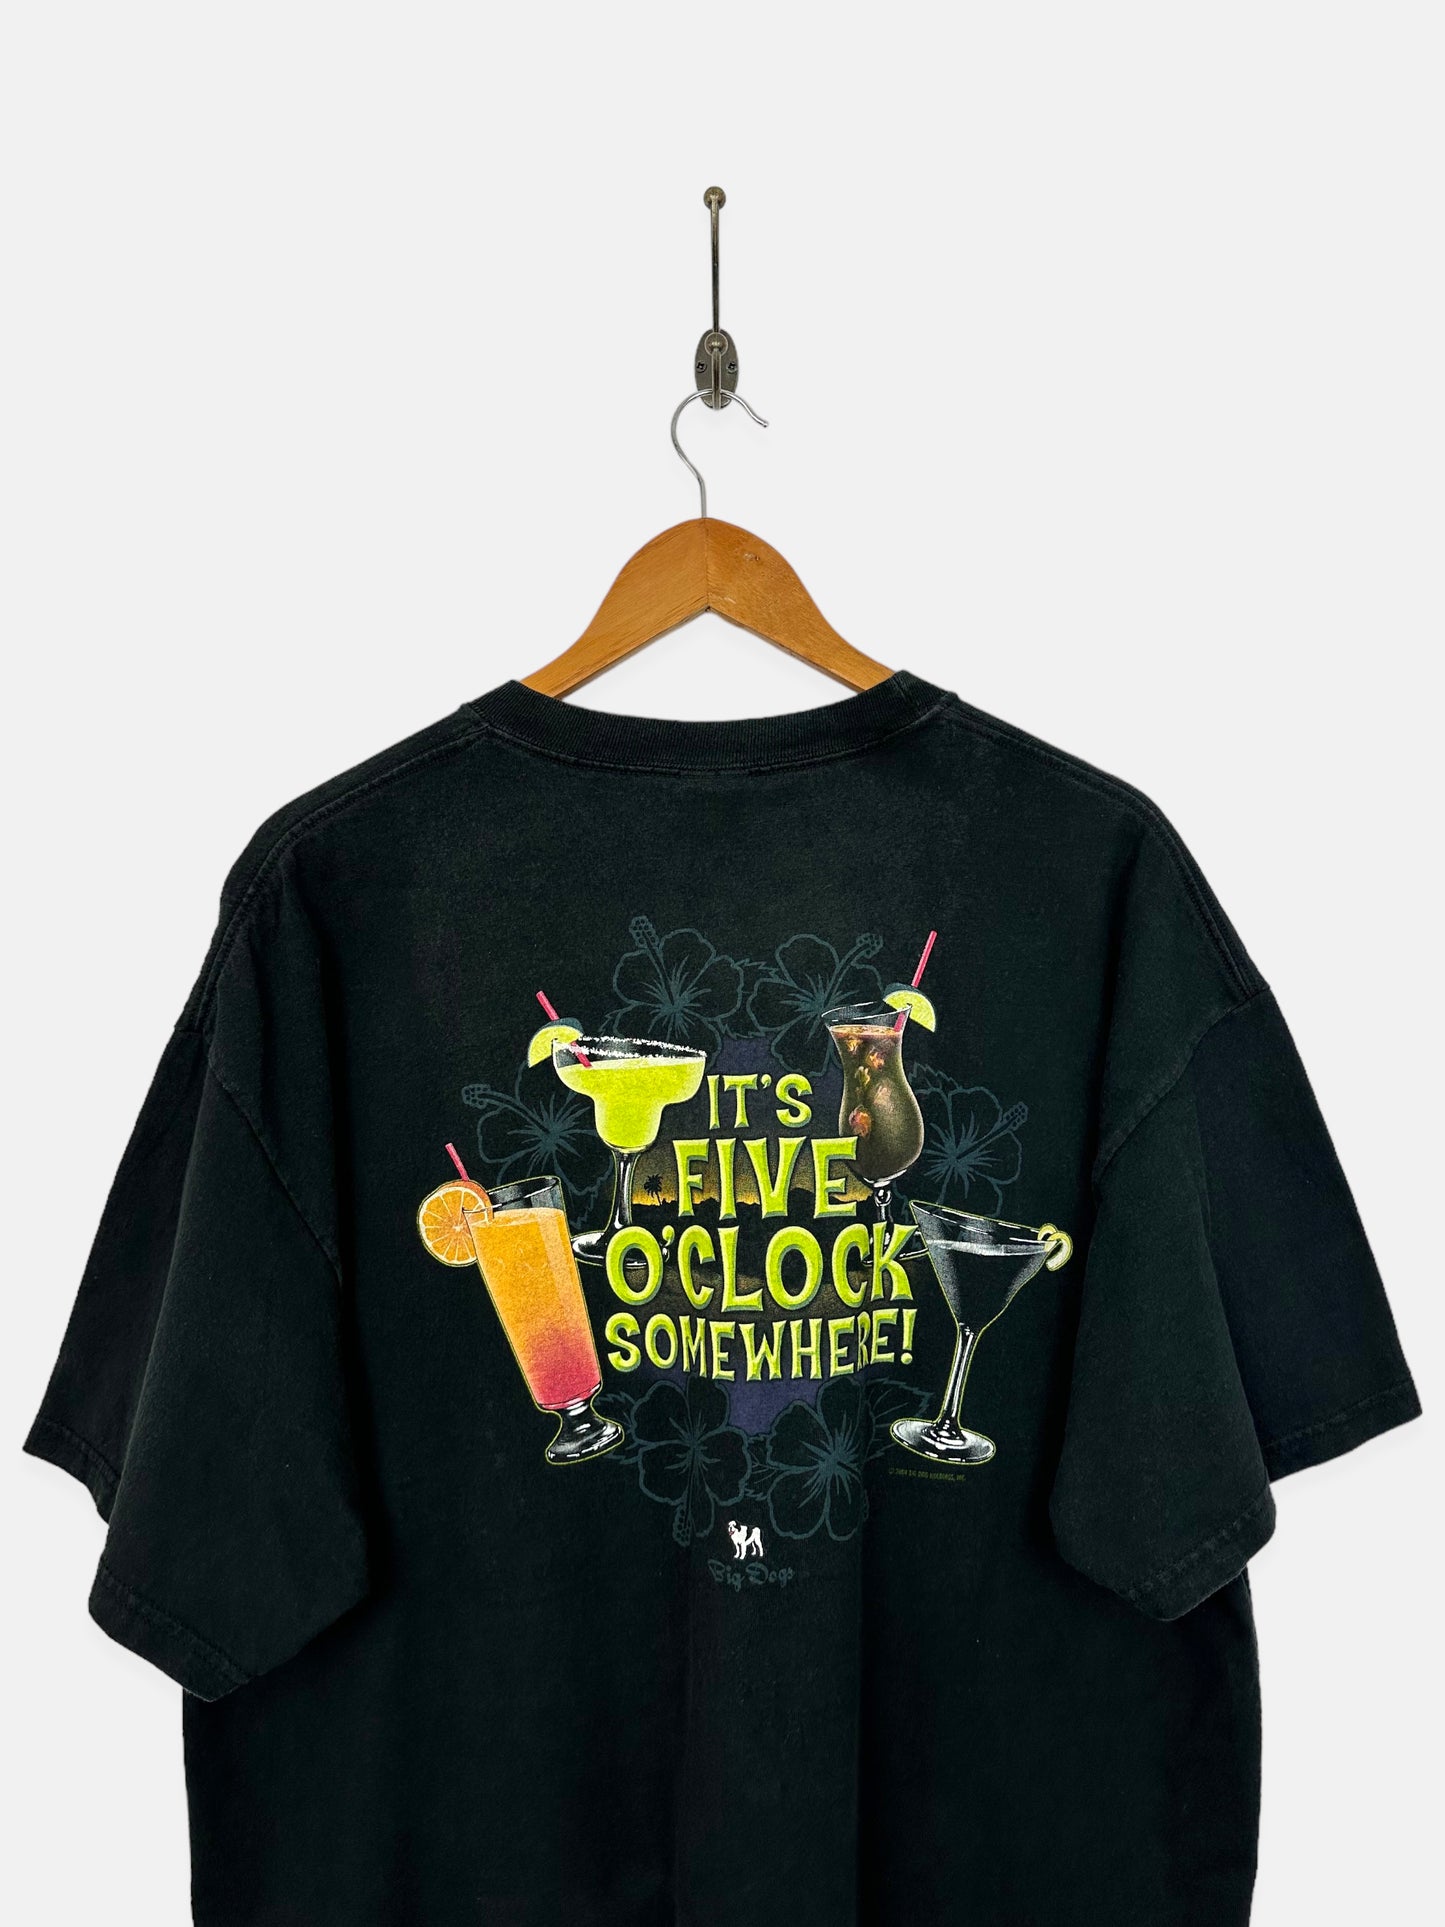 90's Big Dogs It's Five O'CLock Somewhere Vintage T-Shirt Size XL